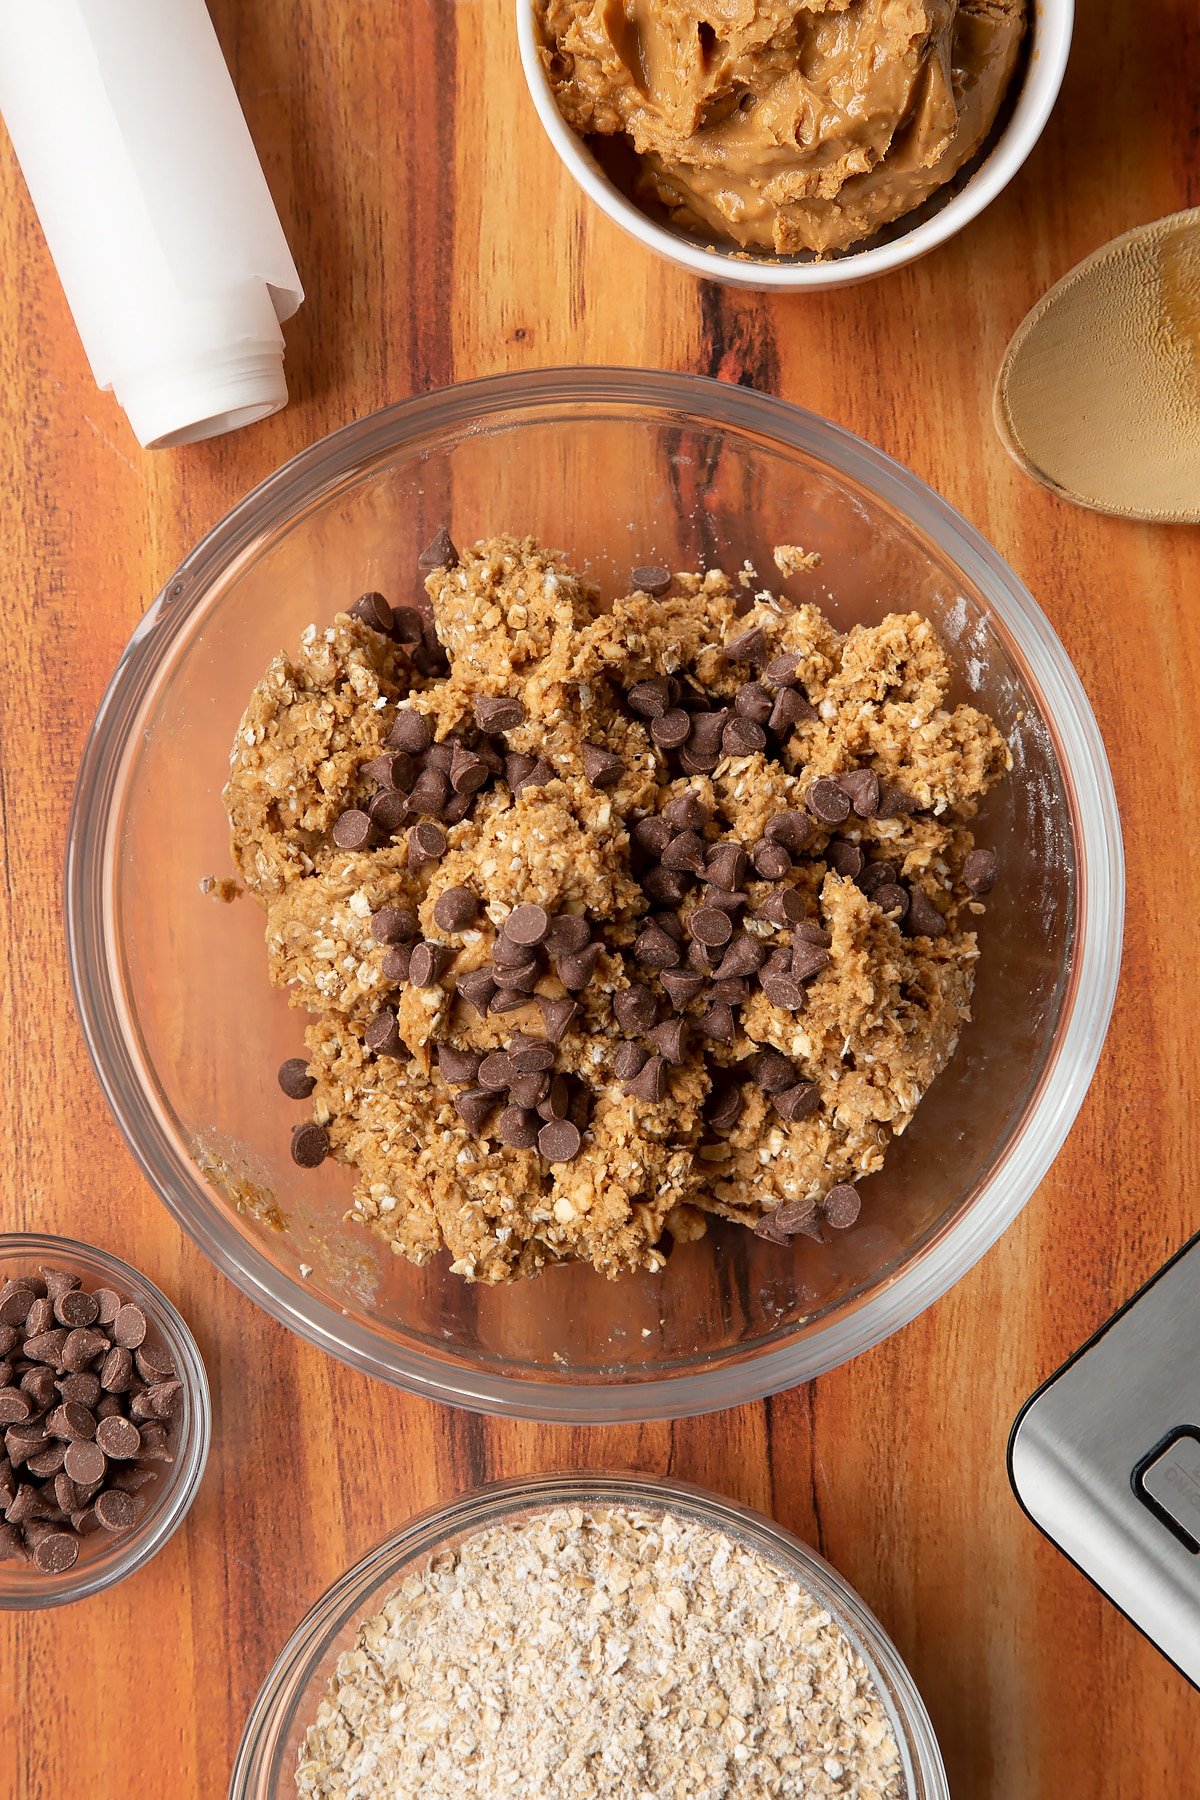 Rolled oats and peanut butter mixed together in a glass mixing bowl with chocolate chips on top. Ingredients to make 3 ingredient peanut butter and oatmeal balls surround the bowl.